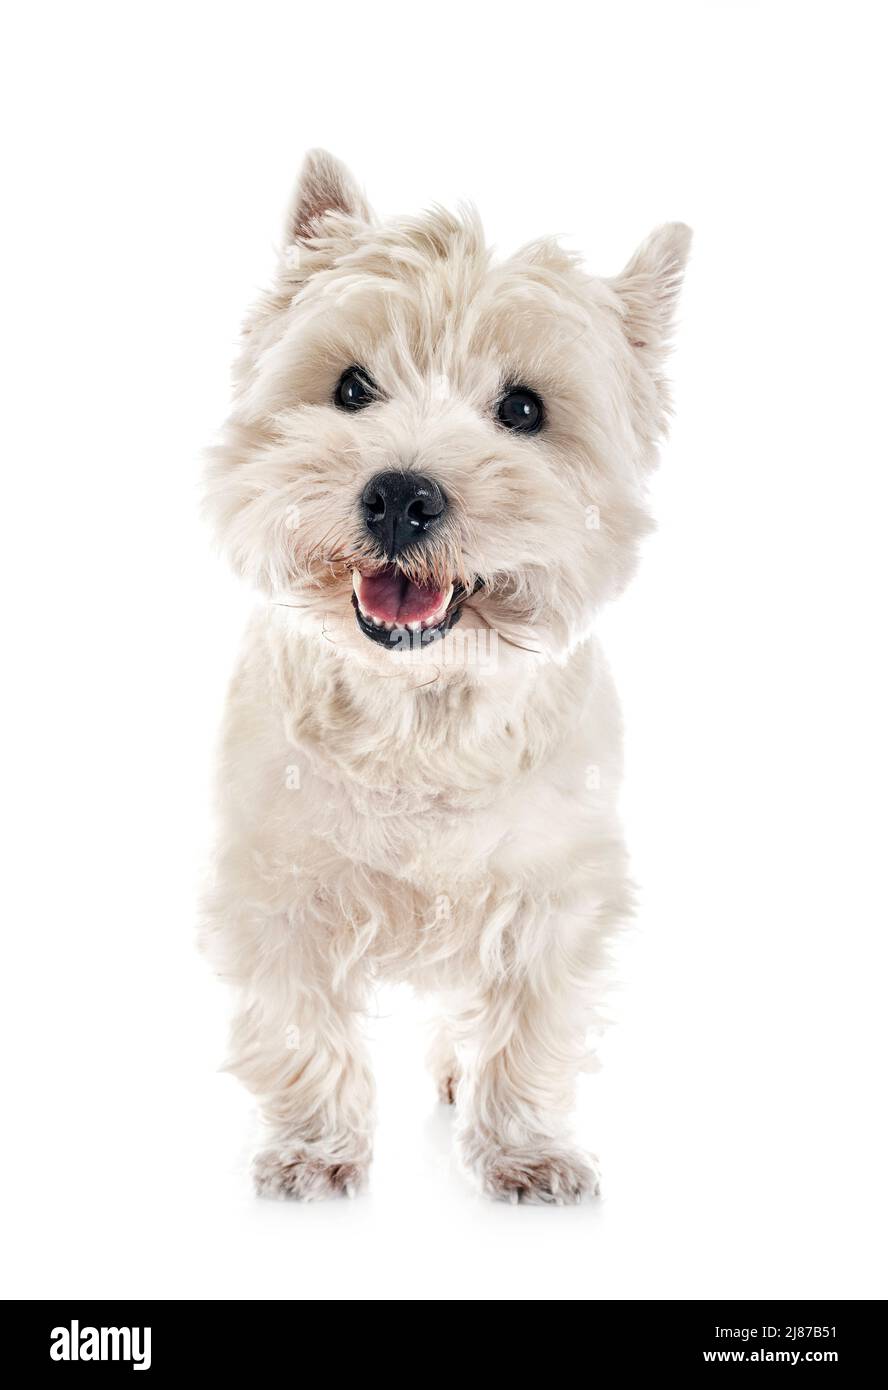 West Highland white terrier in front of white background Stock Photo